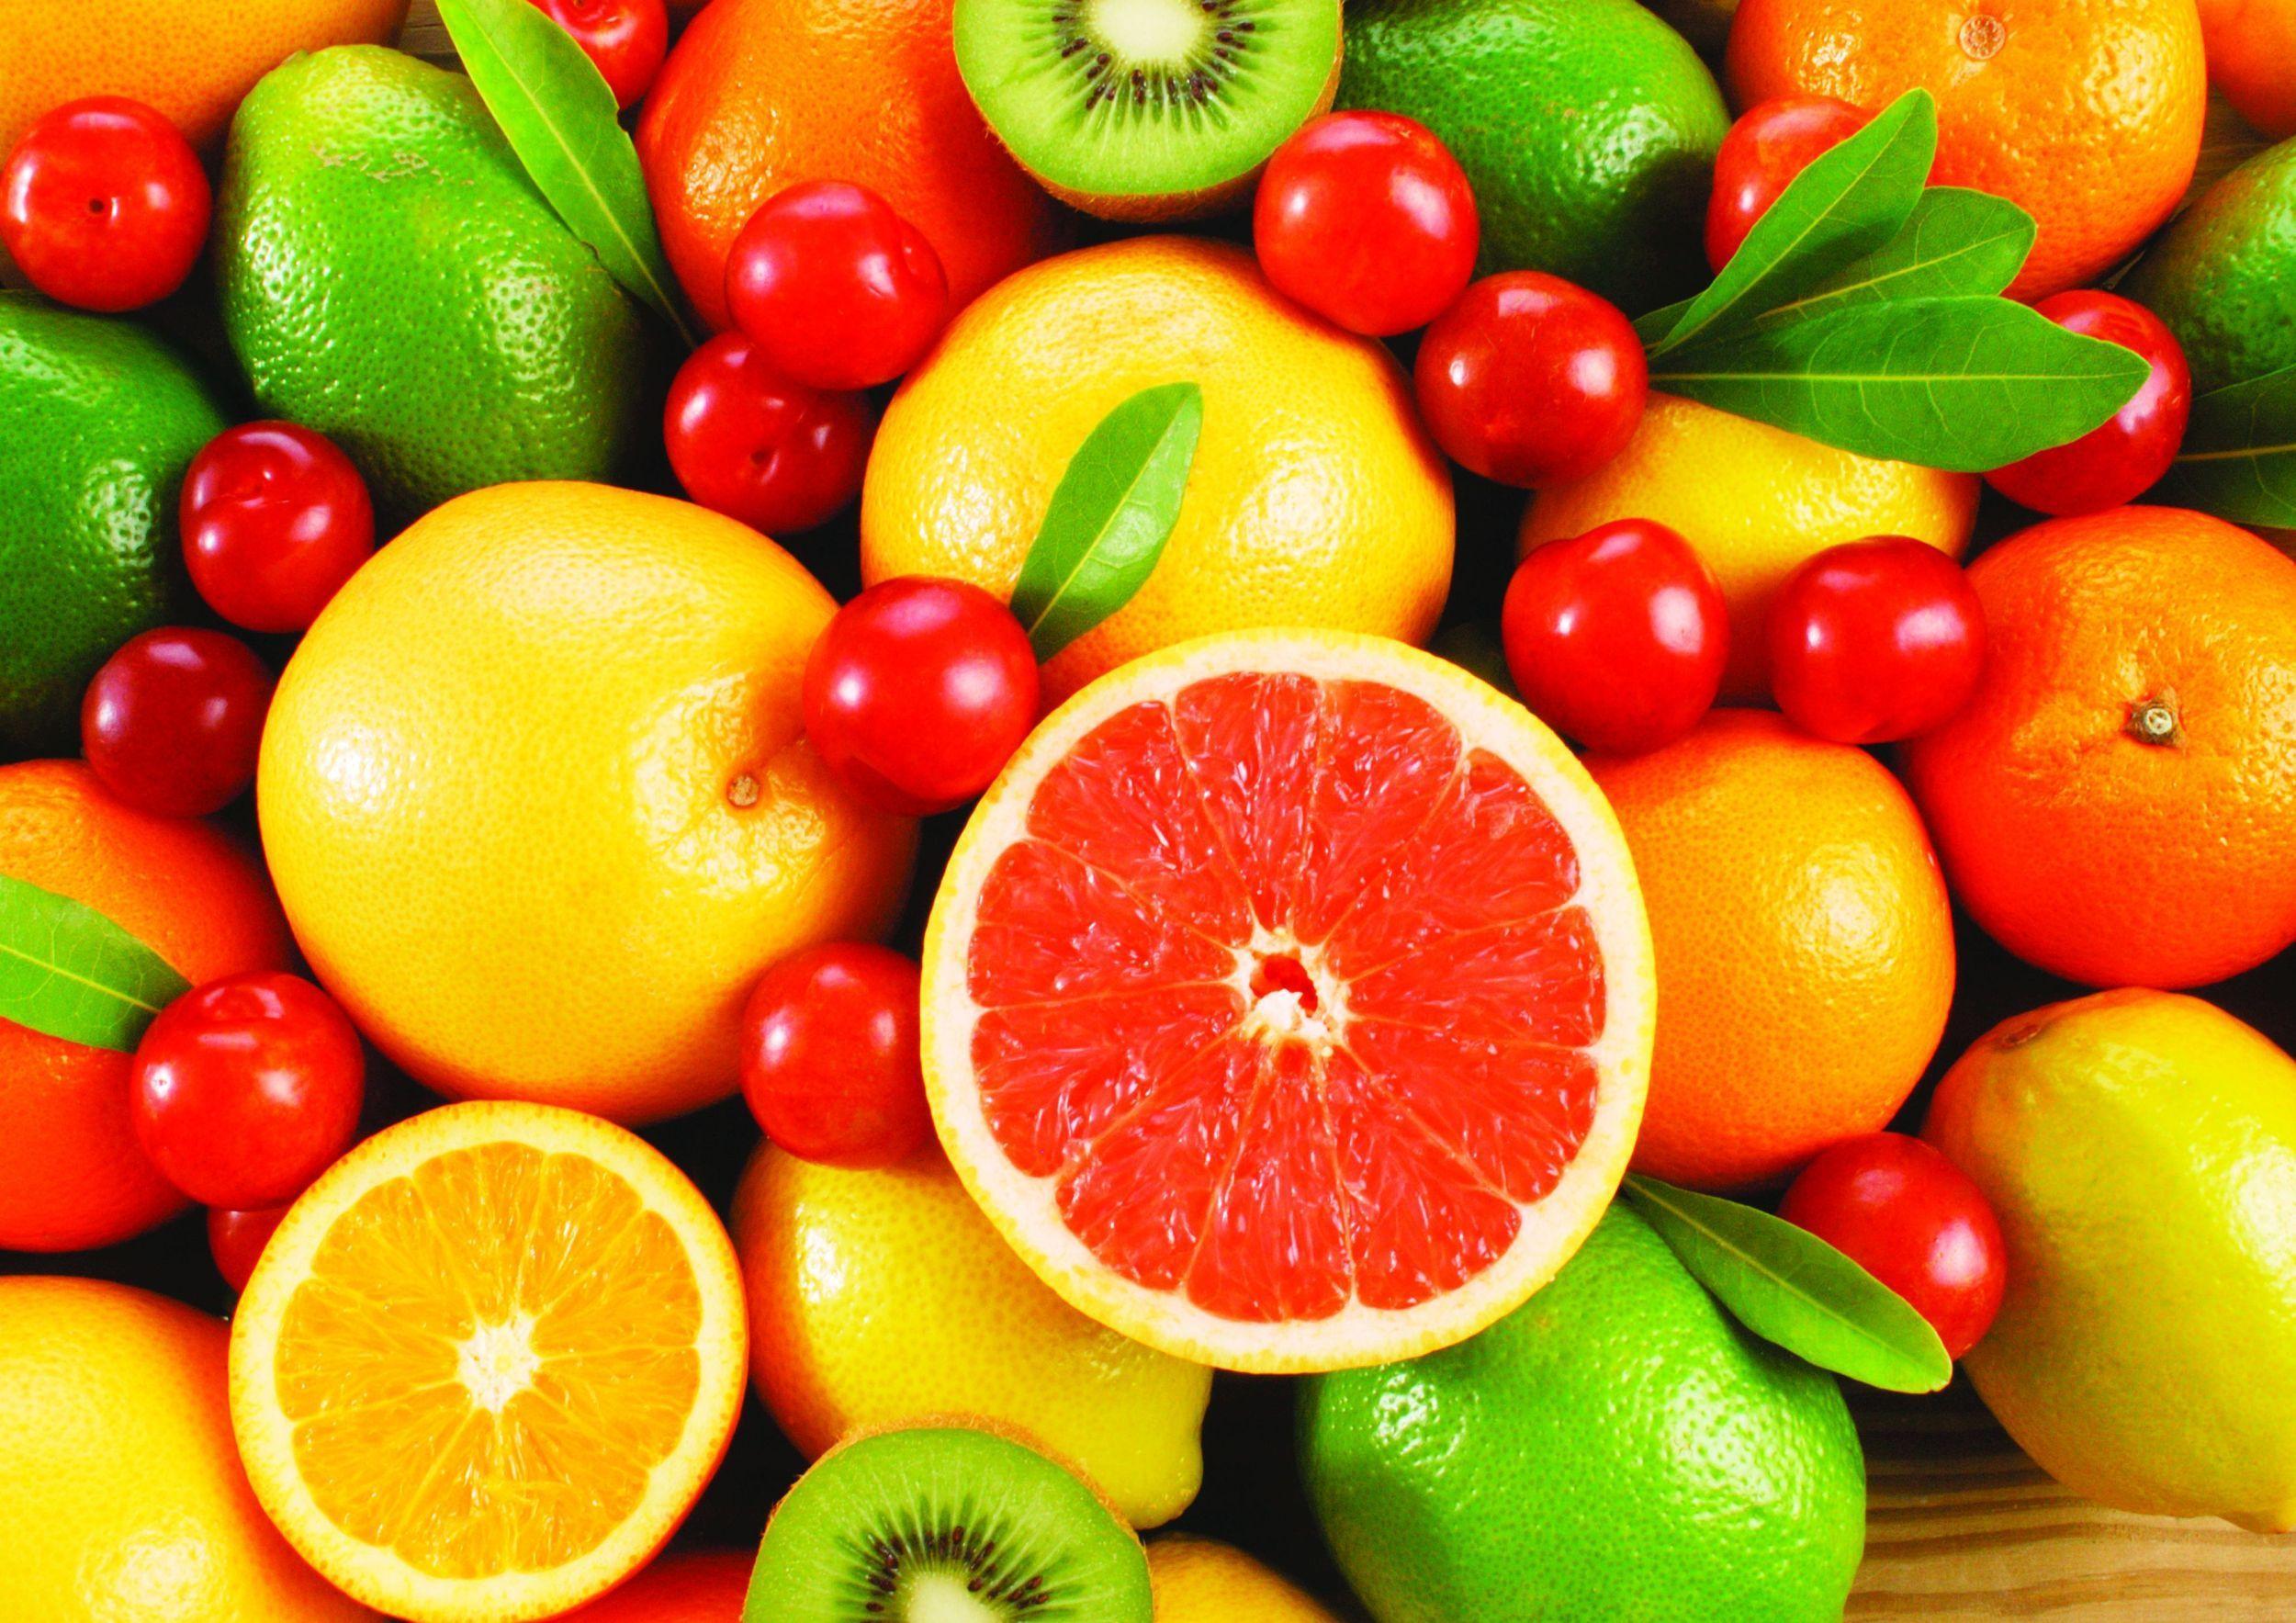 Wallpaper Fruits and Vegetables